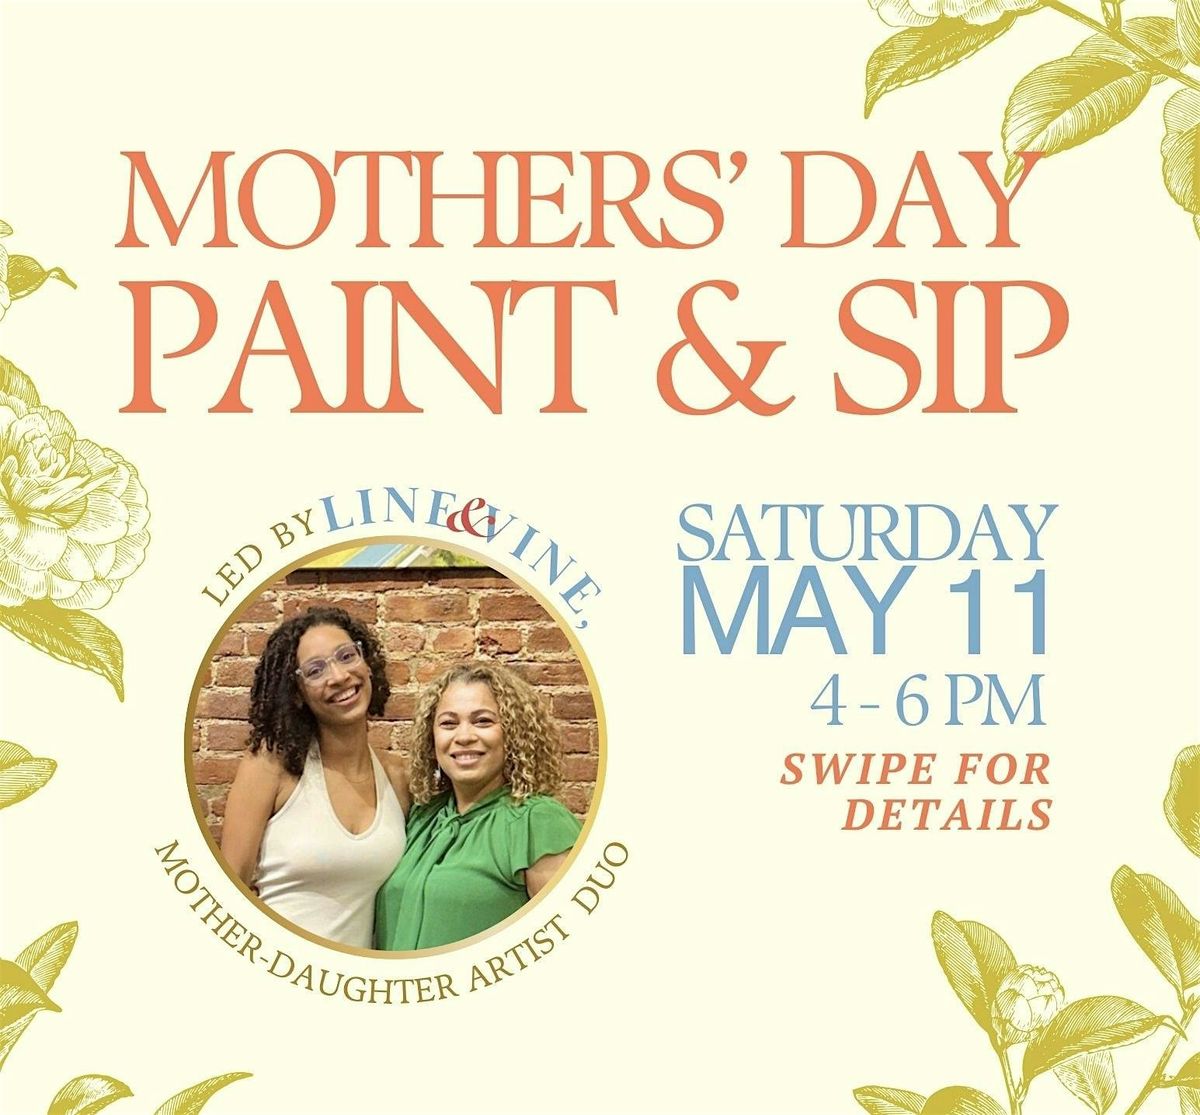 Mothers' Day Paint & Sip @ Crema!